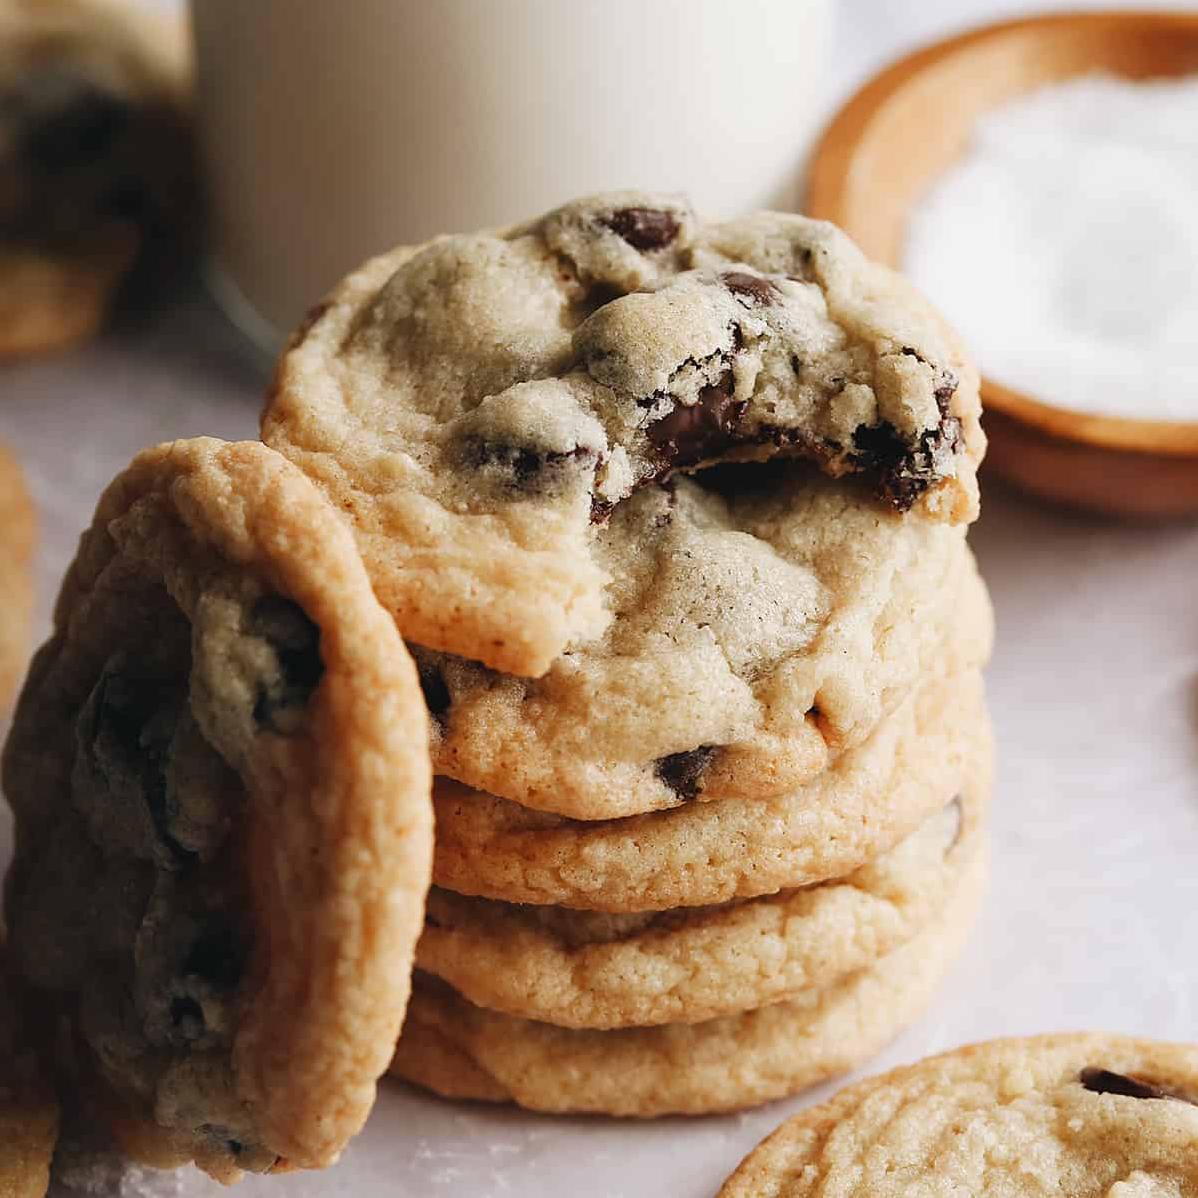  Treat yourself to a warm, gooey chocolate chip cookie that just happens to be gluten-free.